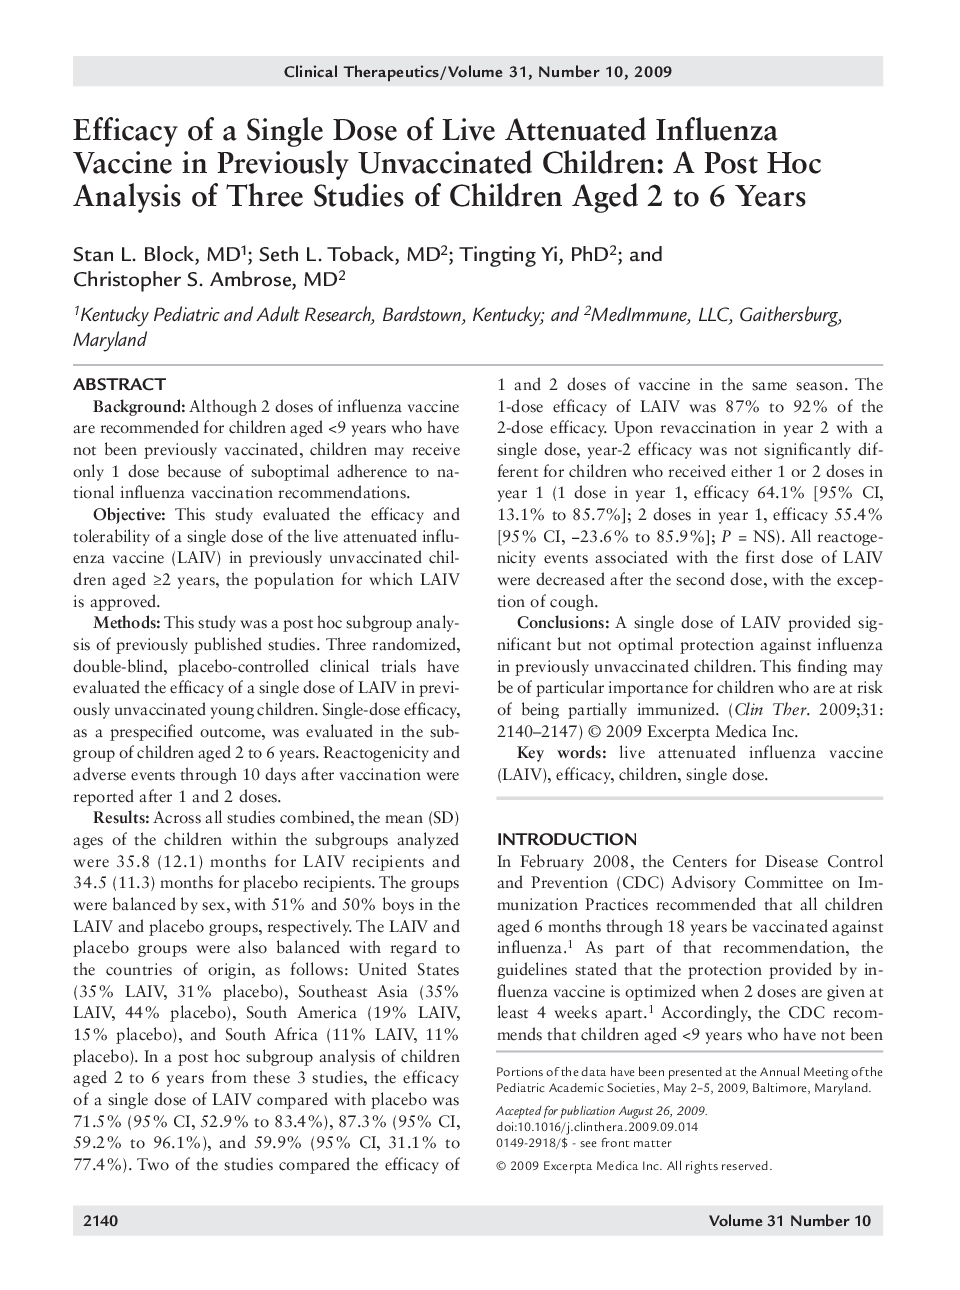 Efficacy of a single dose of live attenuated influenza vaccine in previously unvaccinated children: A post hoc analysis of three studies of children aged 2 to 6 years